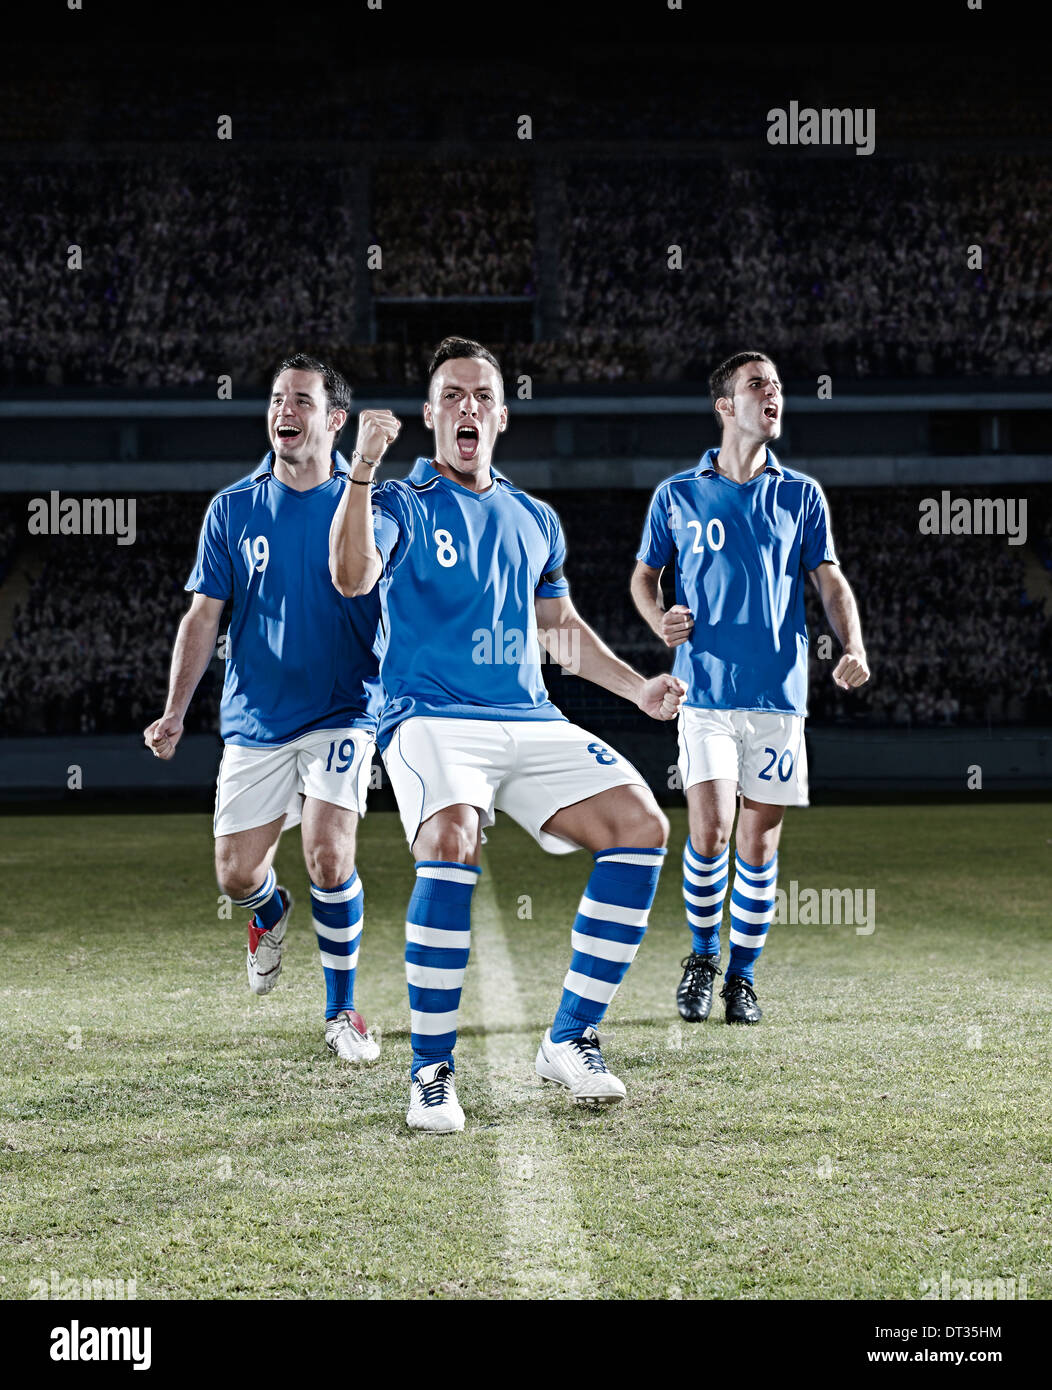 Soccer players cheering on field Stock Photo